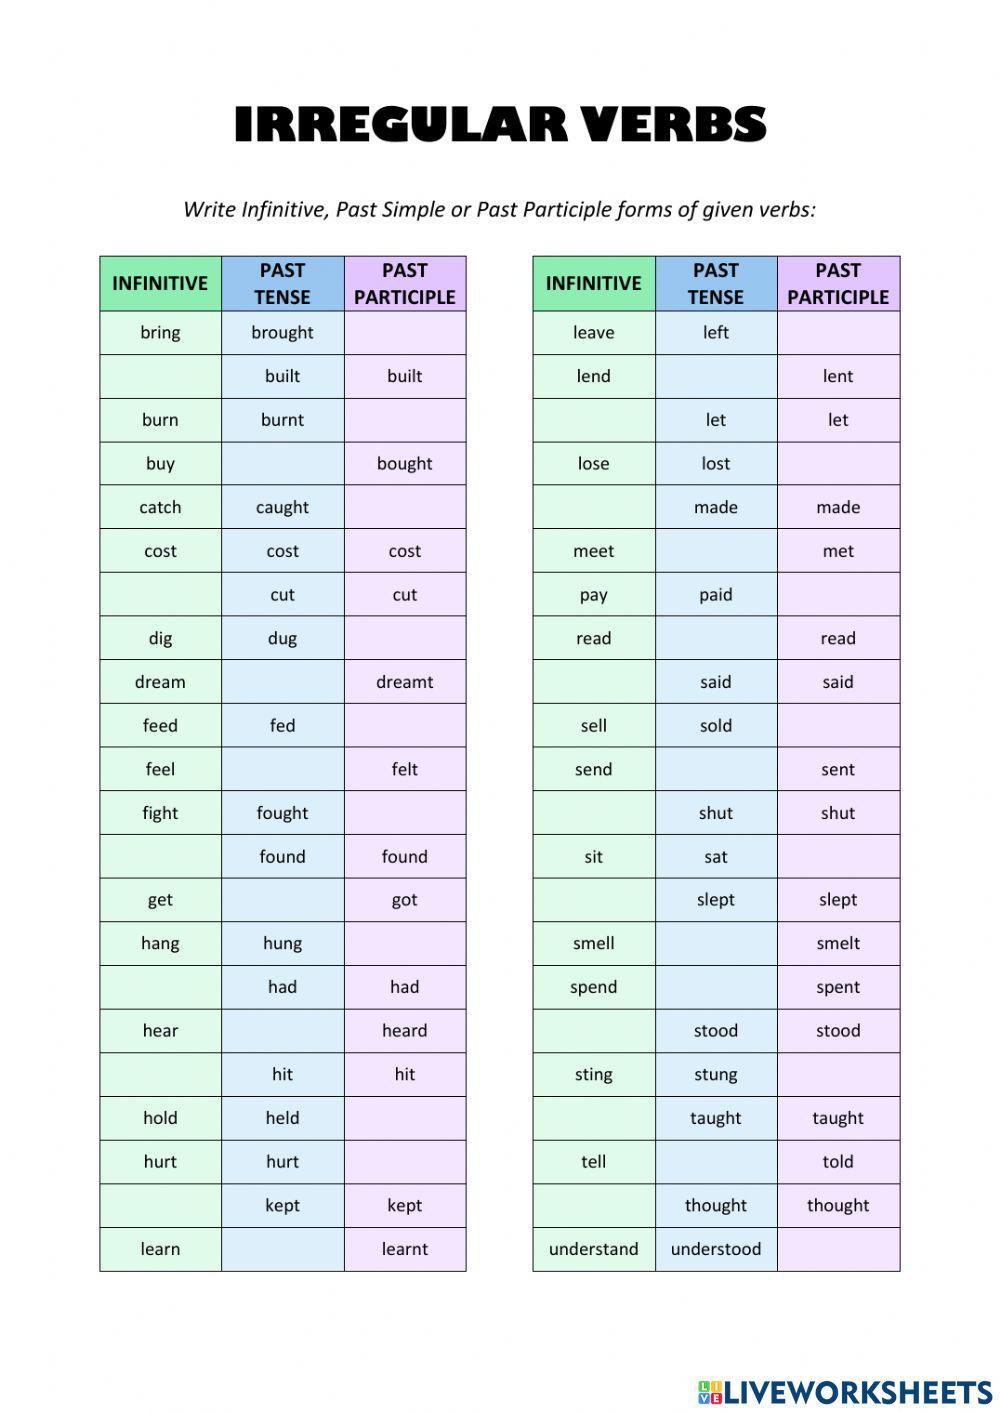 Irregular verbs - Complete the table